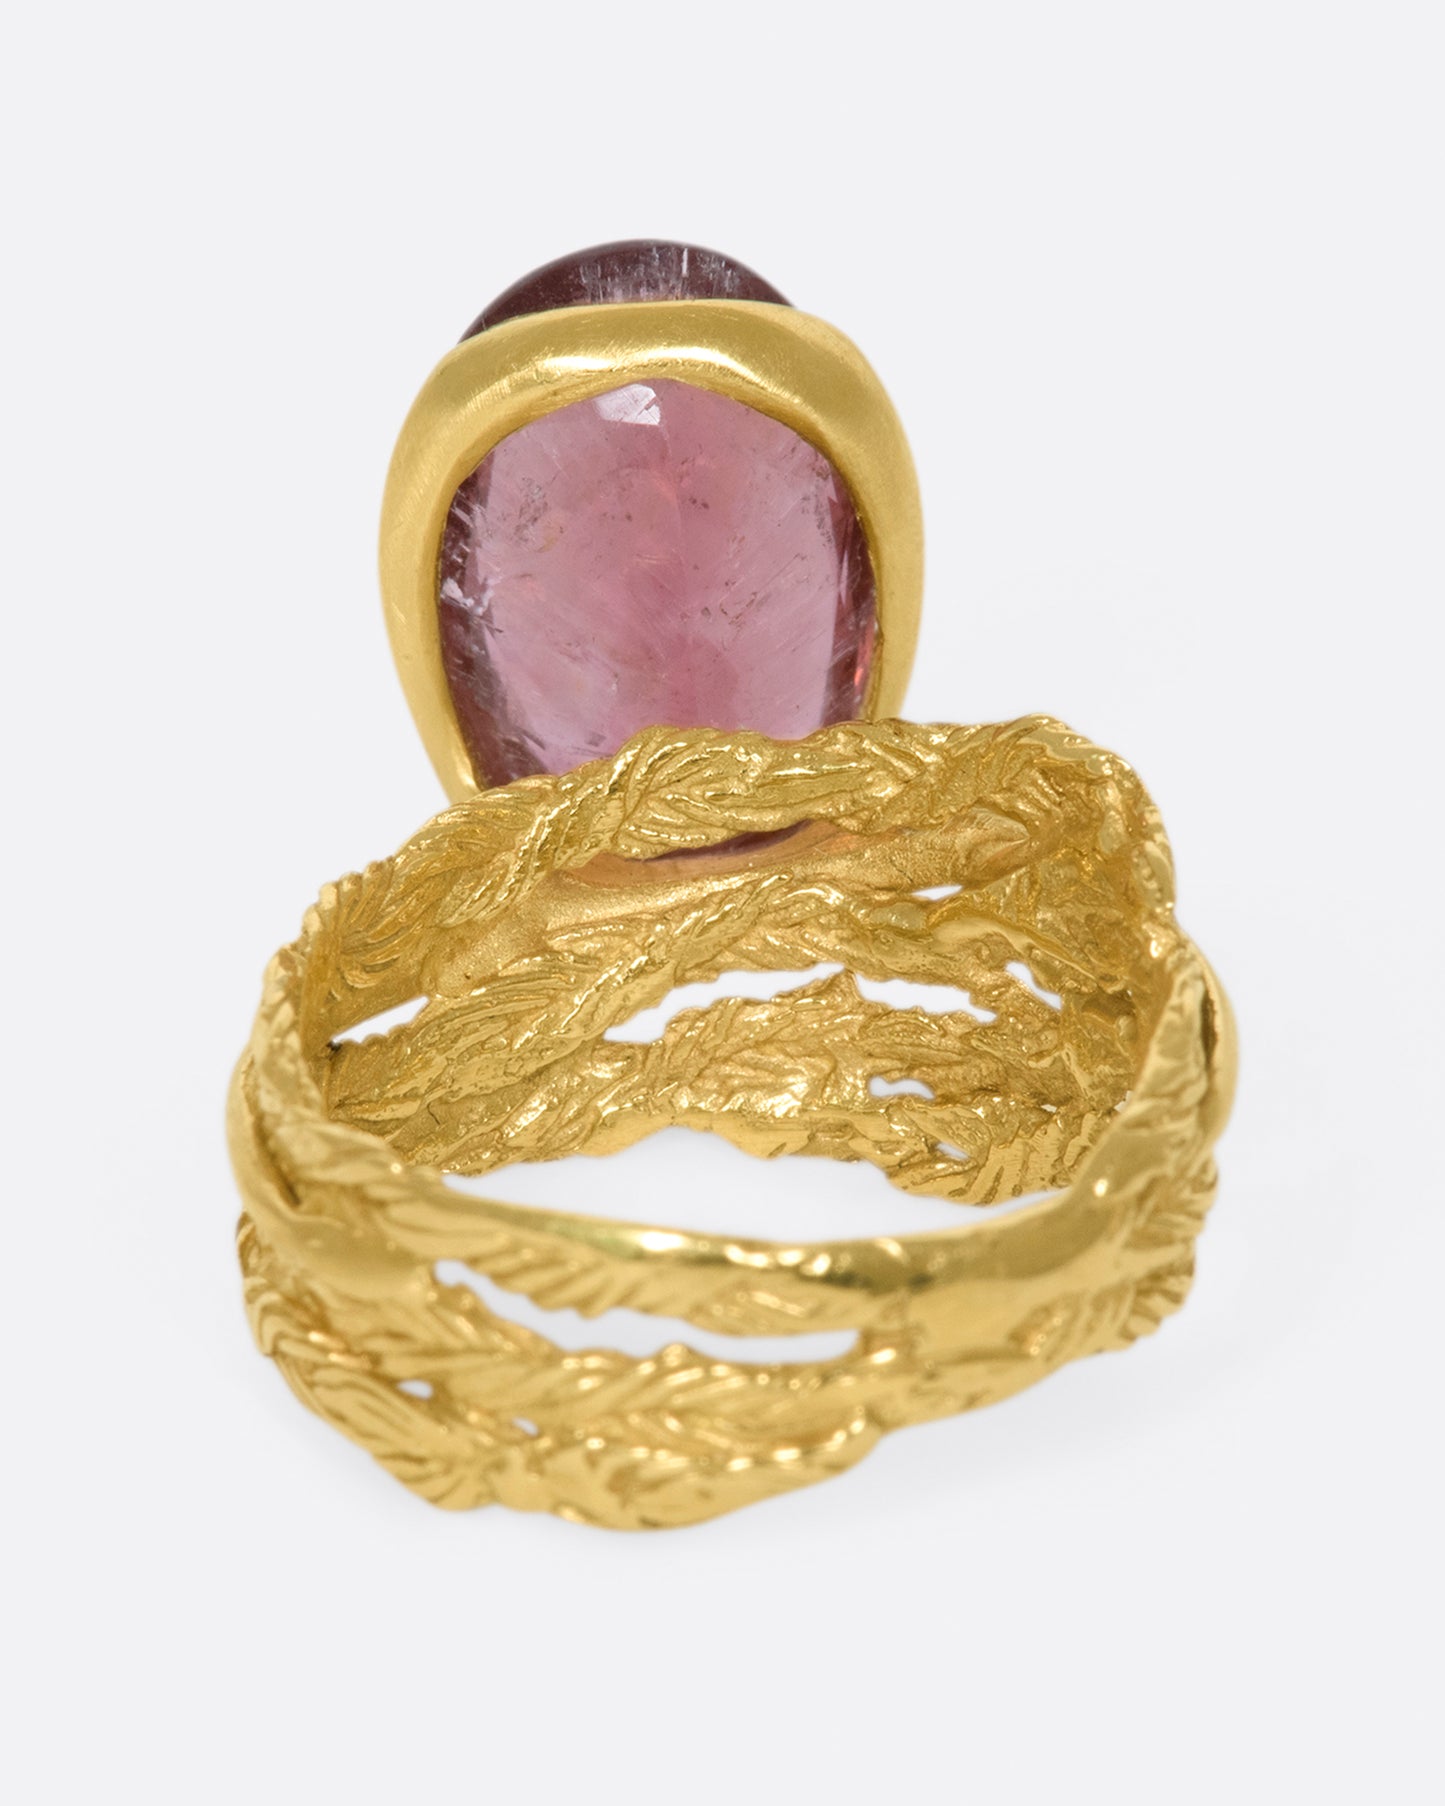 A gold braided band with an oval shaped rose tourmaline.